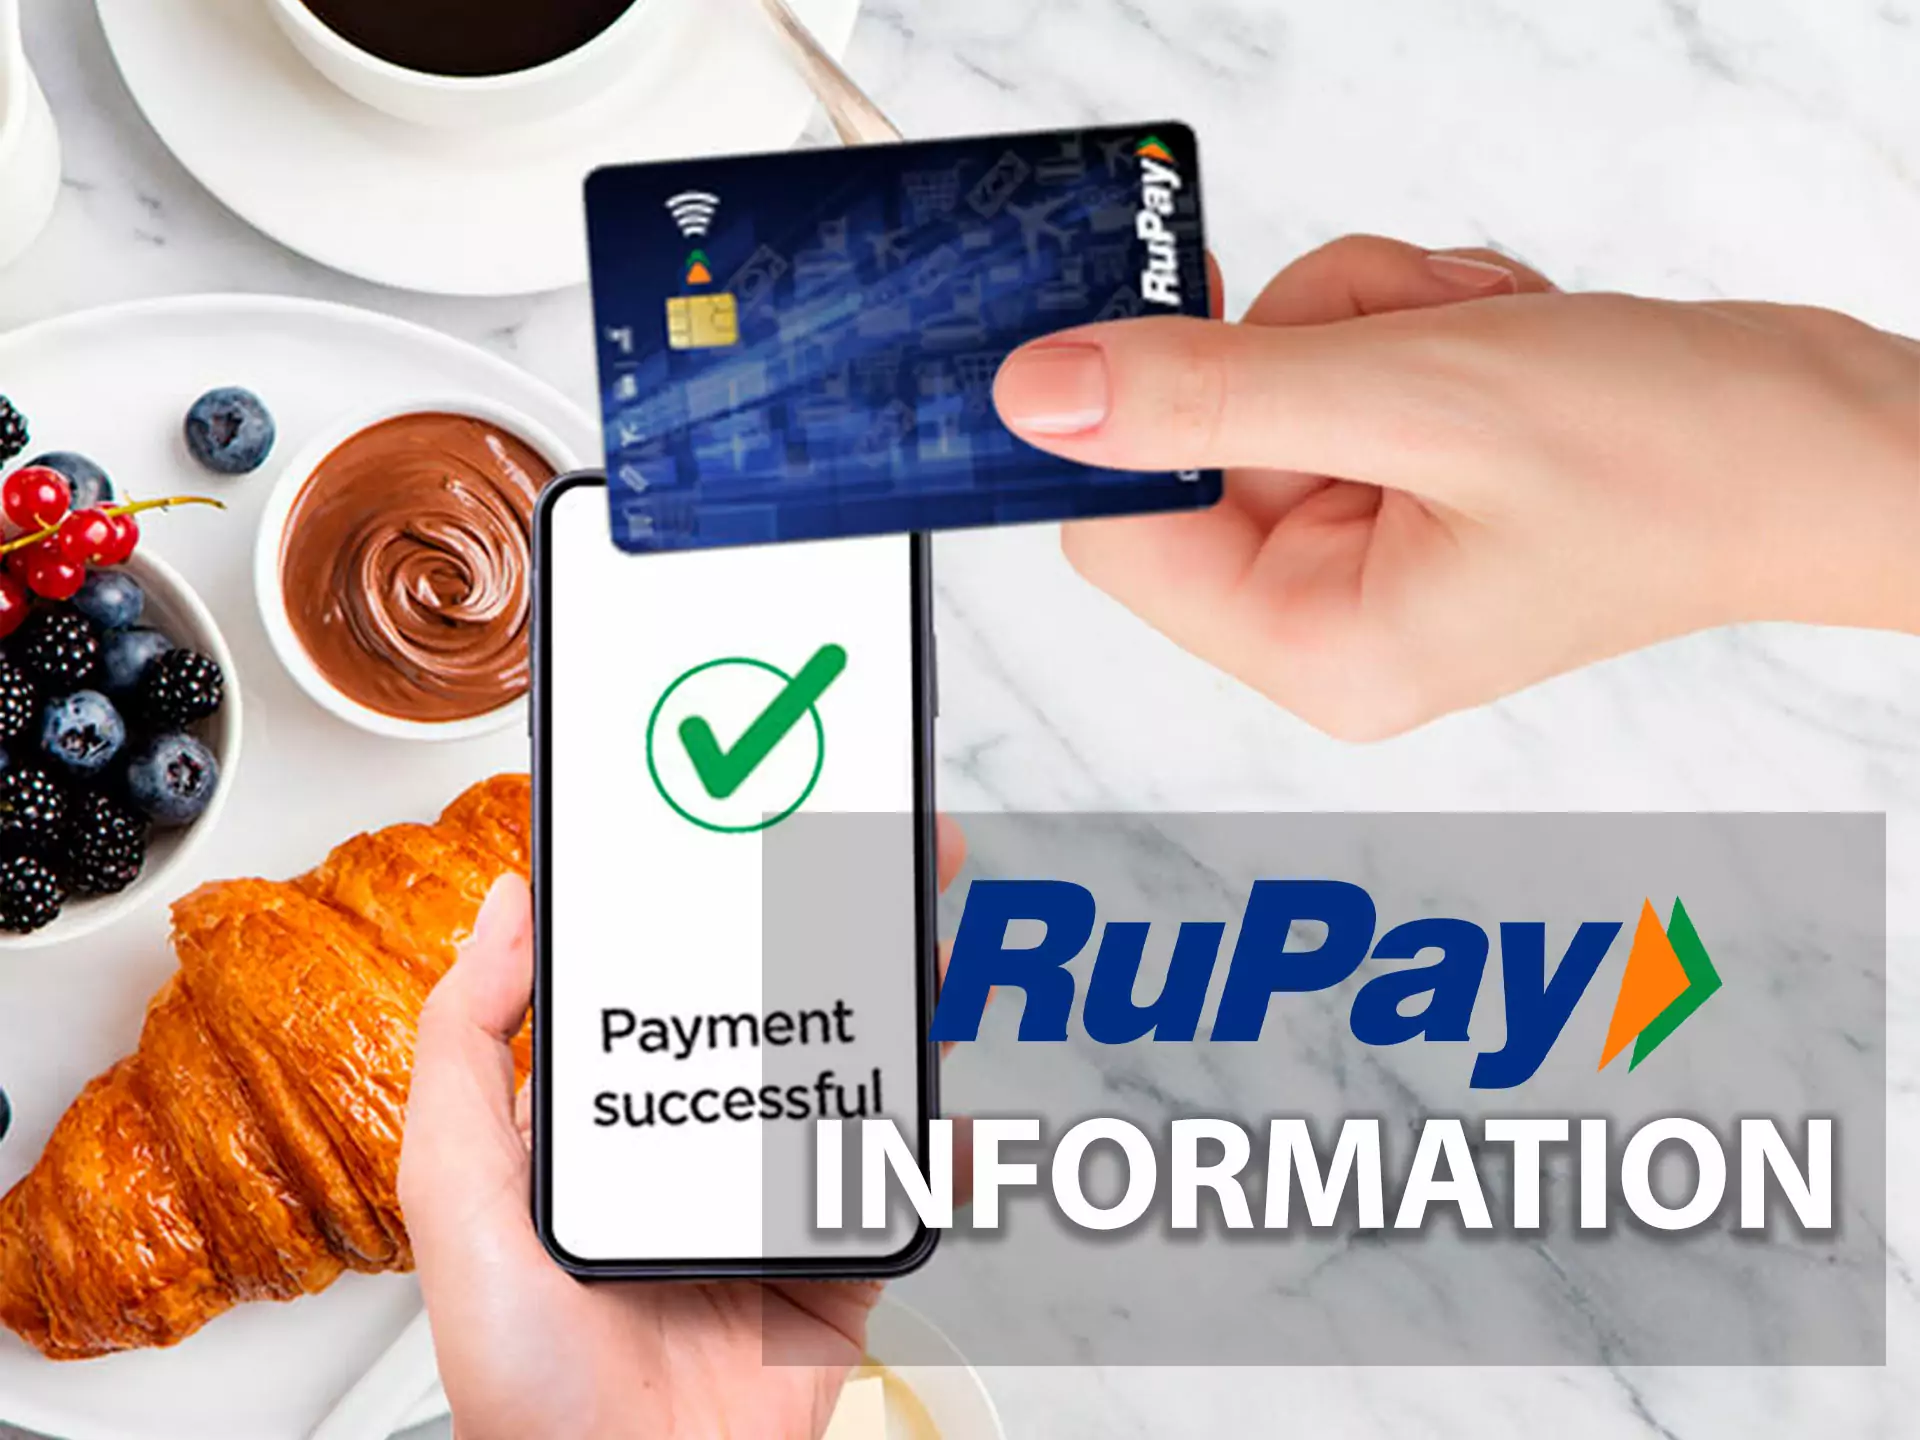 You can use RuPay in most of Indian betting sites and apps.